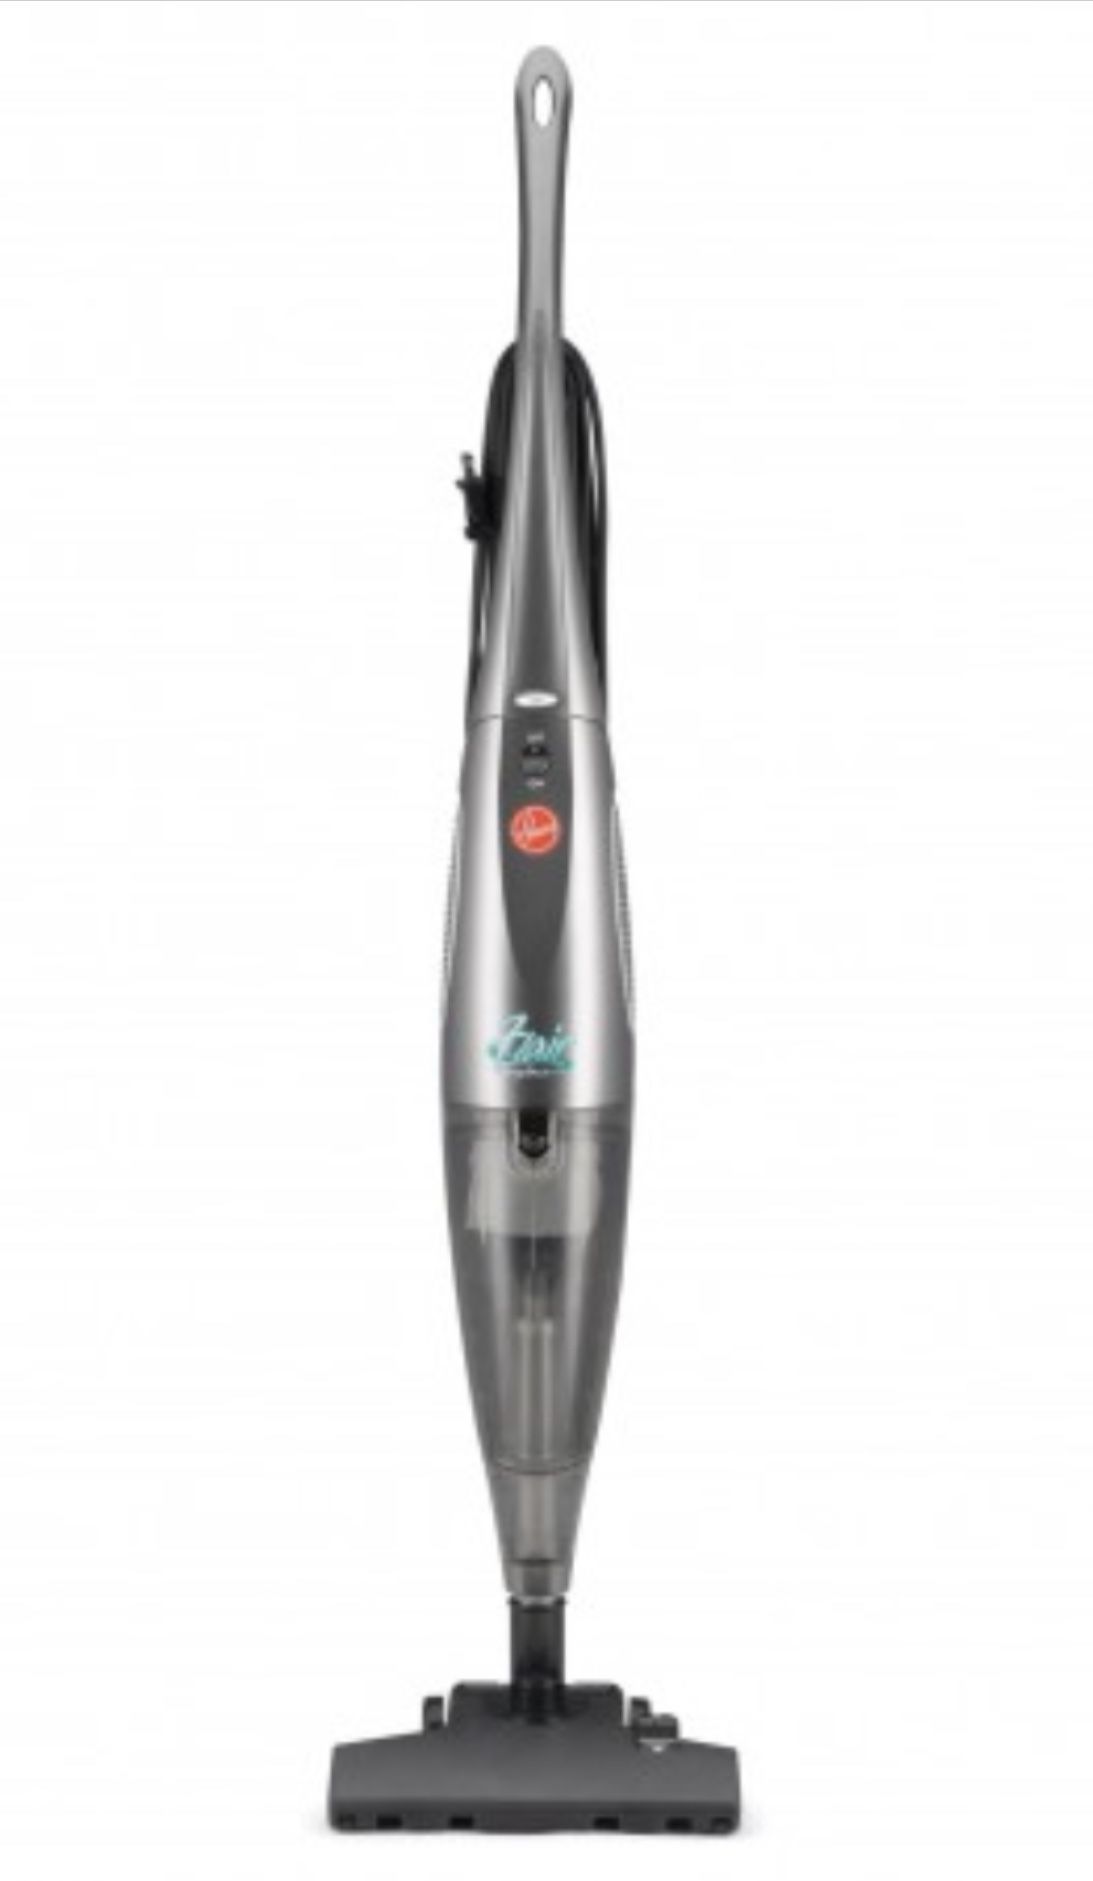 Hoover Flair Cleaner: Bagless Stick Vacuum